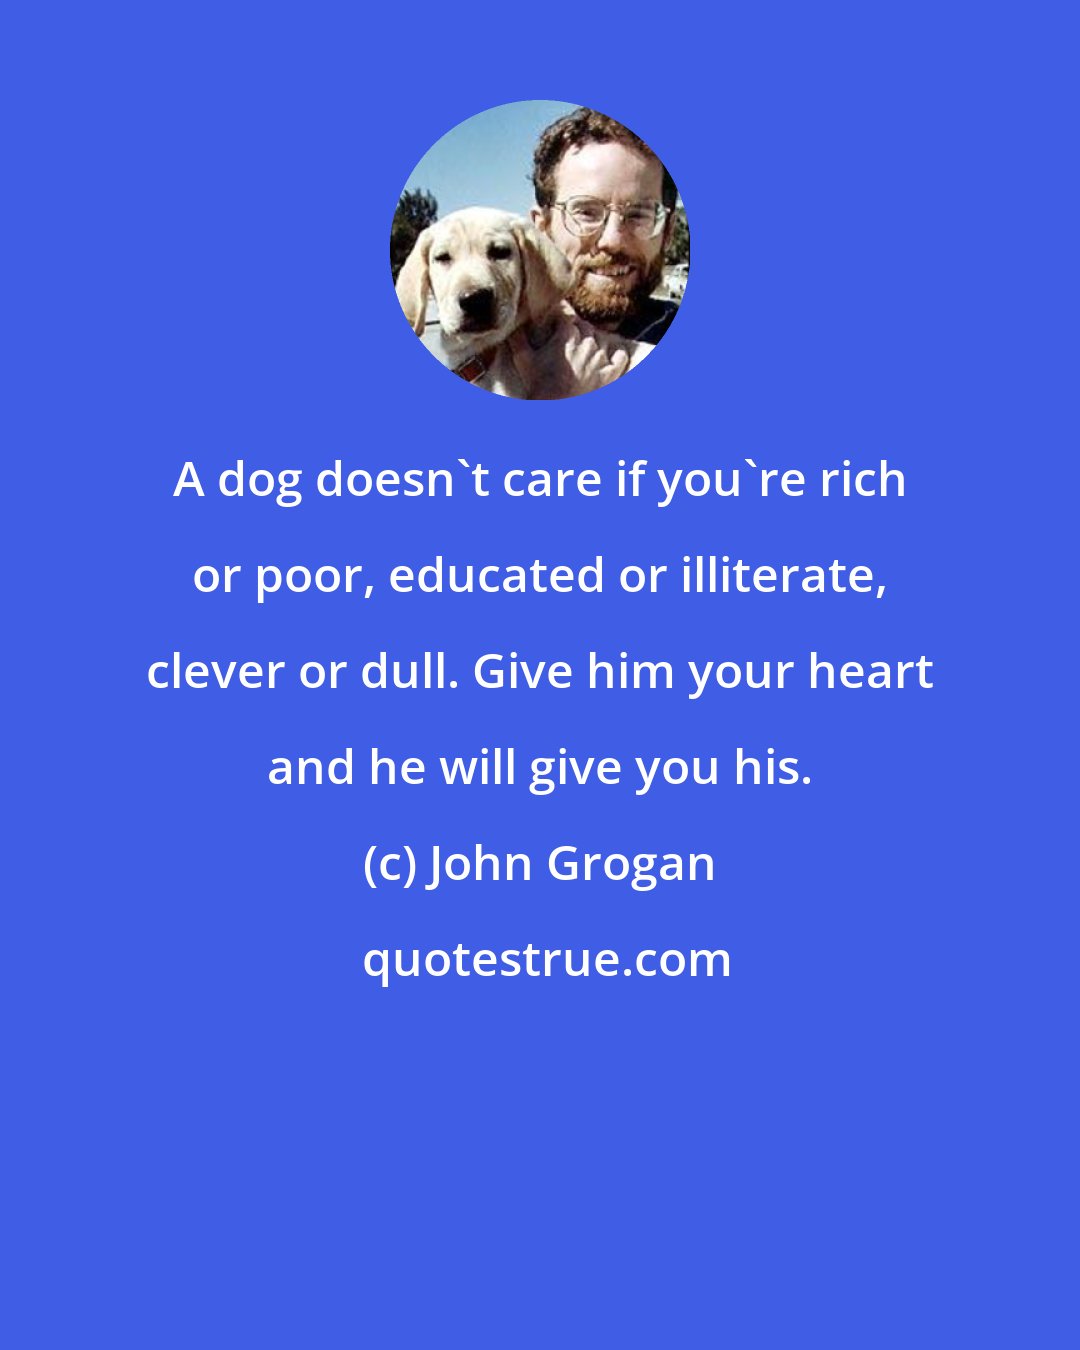 John Grogan: A dog doesn't care if you're rich or poor, educated or illiterate, clever or dull. Give him your heart and he will give you his.